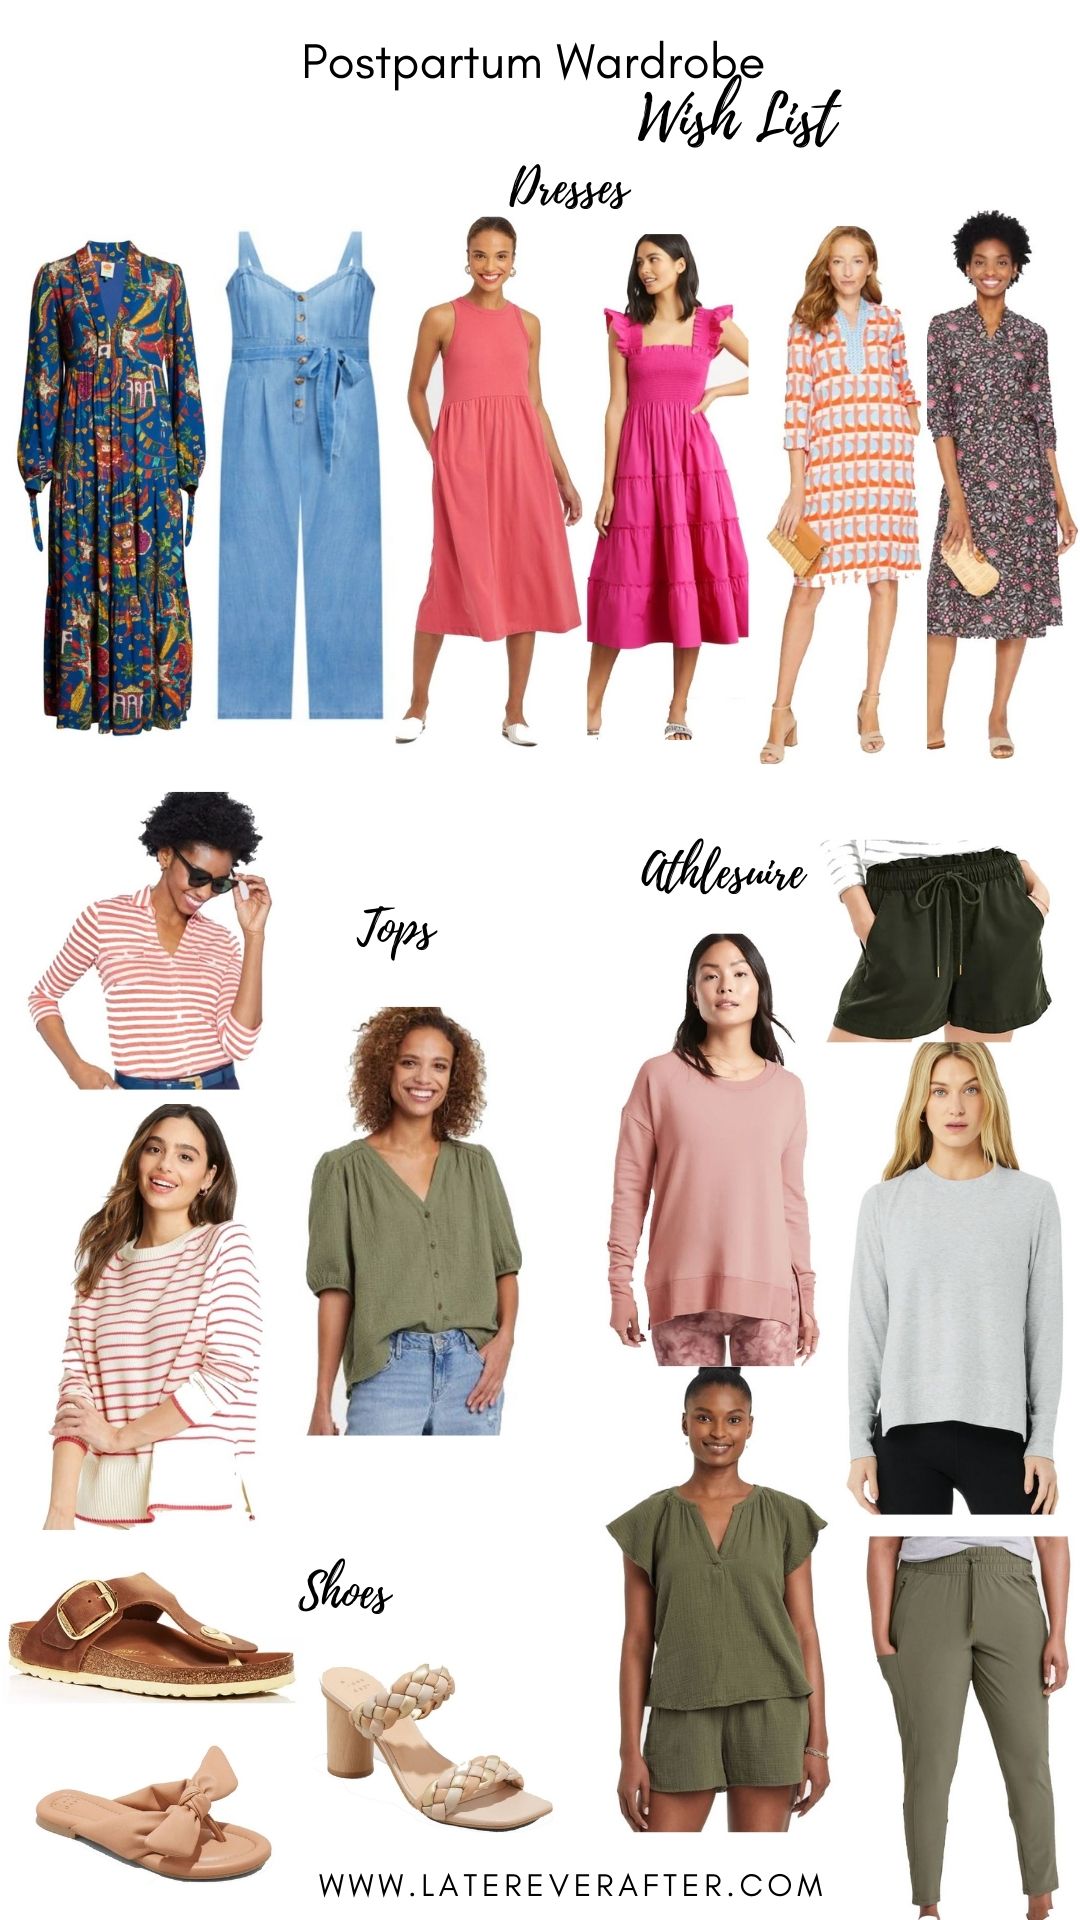 Postpartum Outfits Wish List - Later Ever After, BlogLater Ever After – A  Chicago Based Life, Style and Fashion Blog